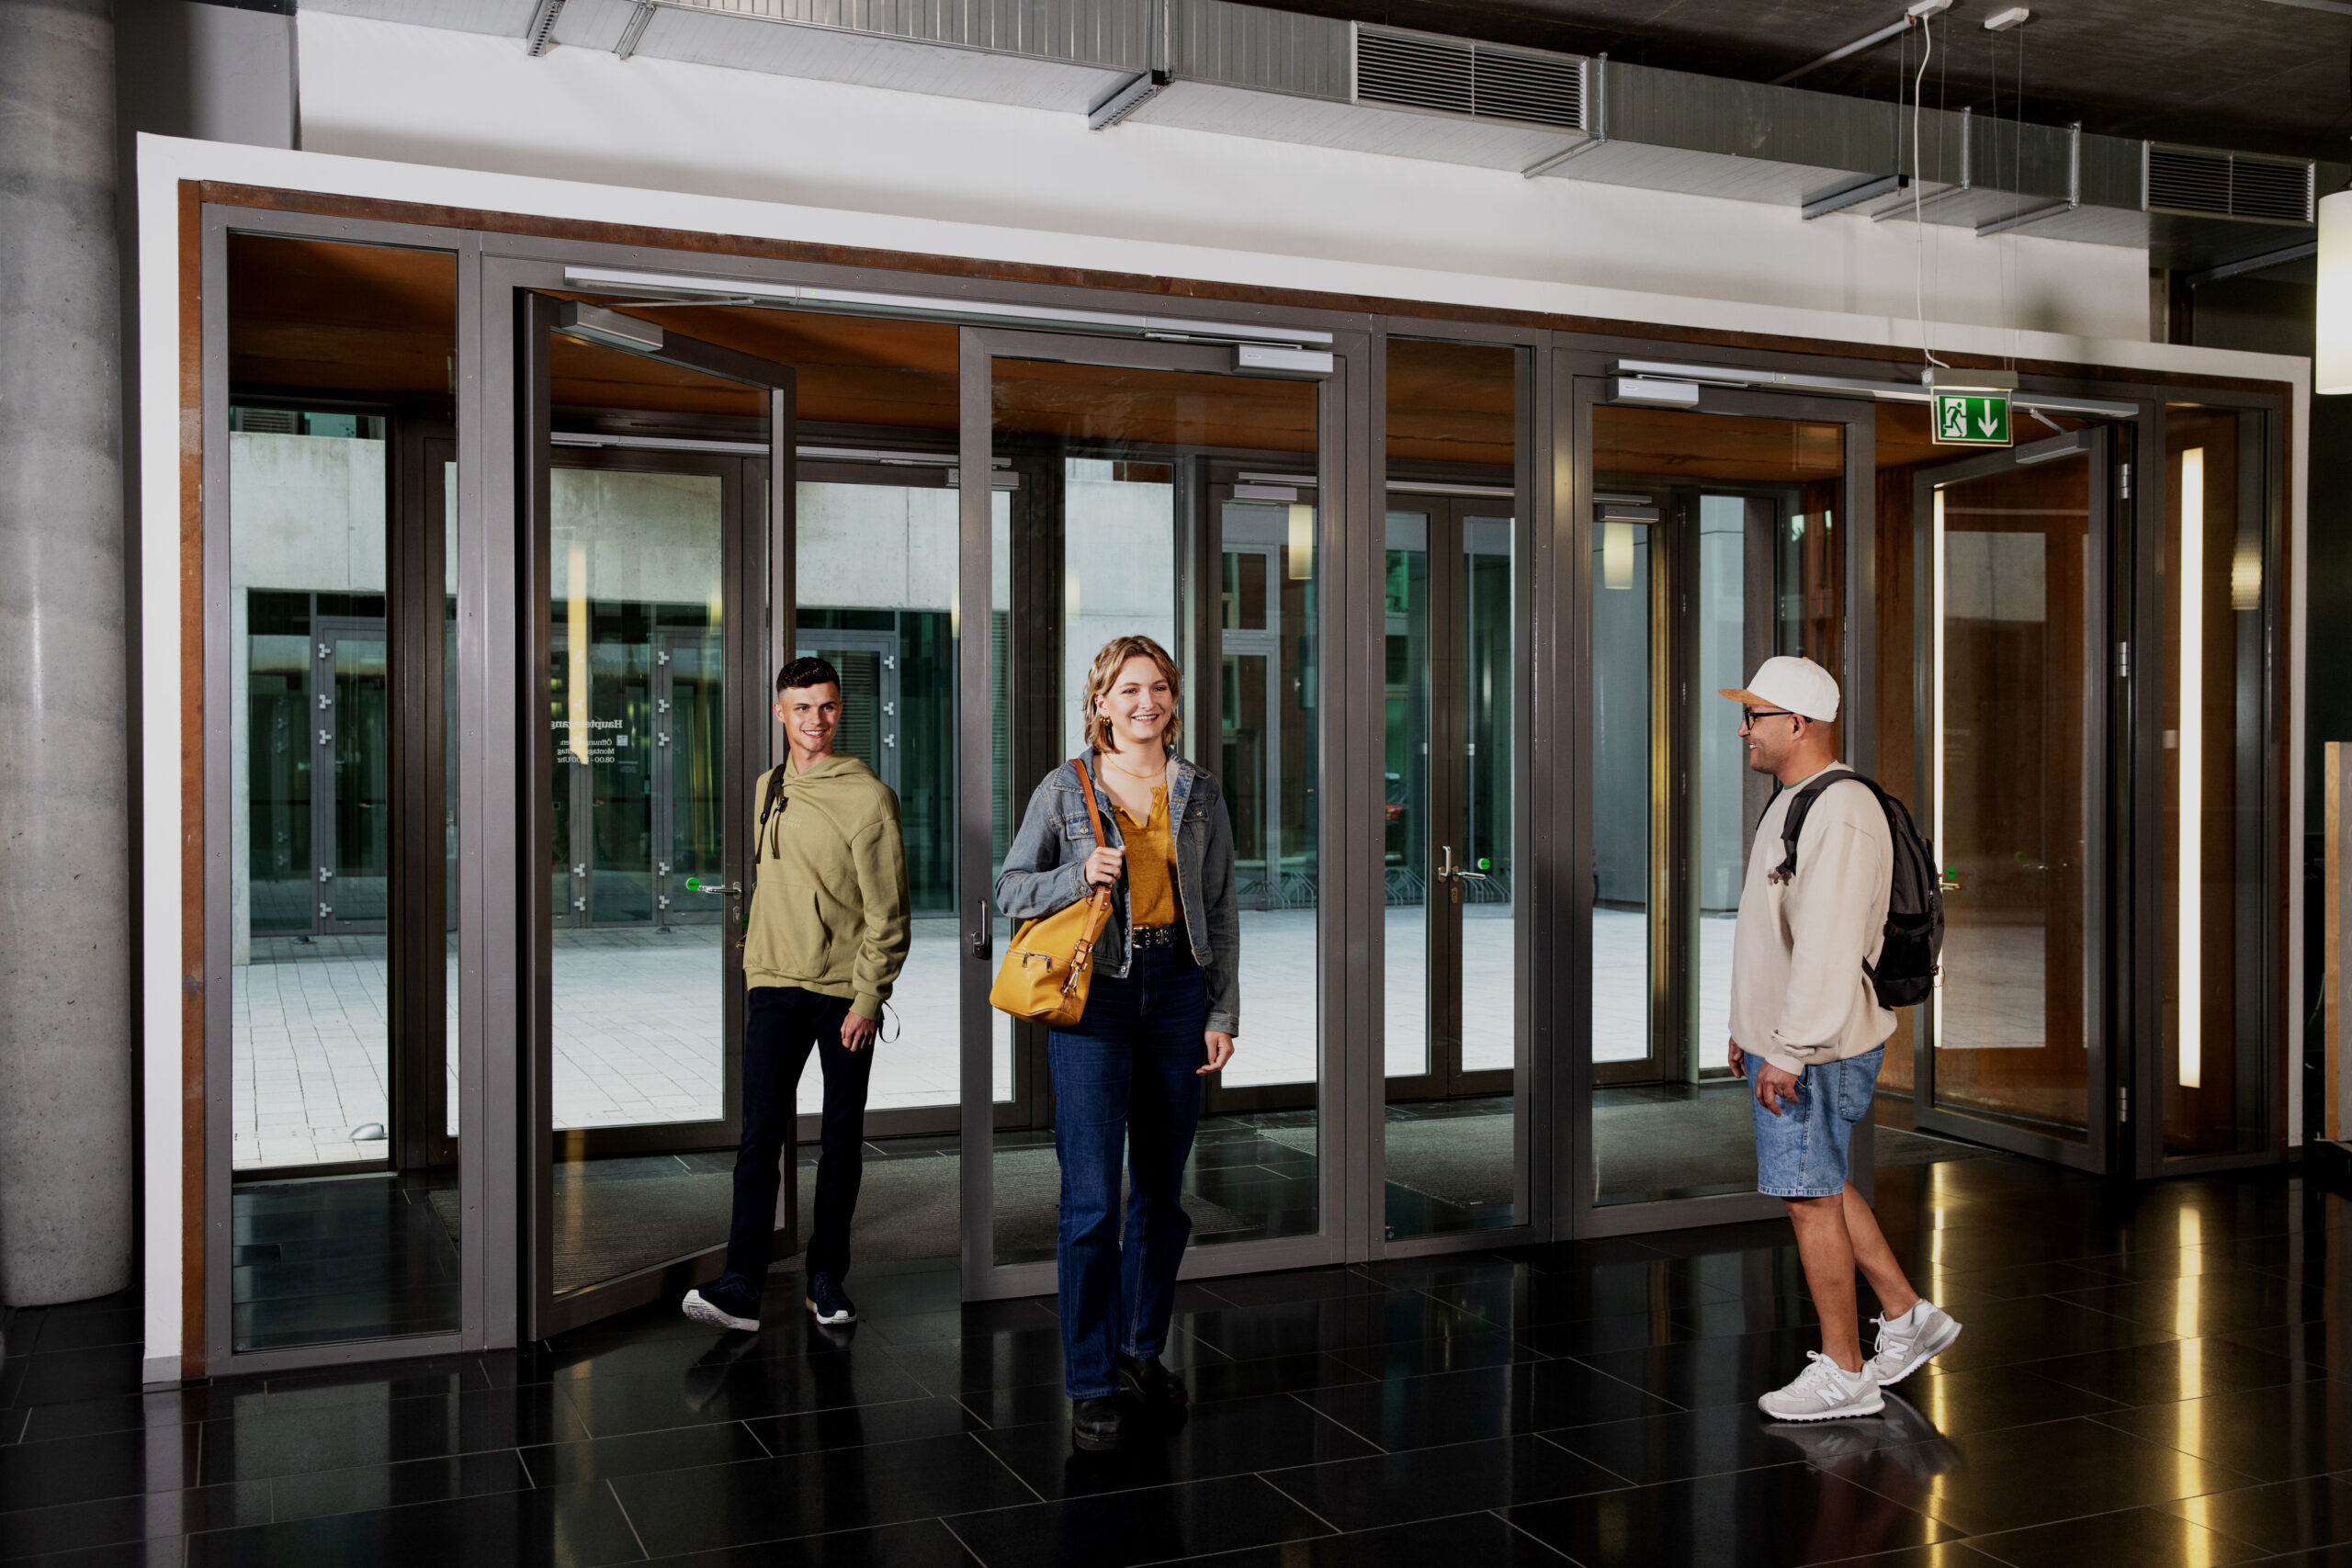 Assa Abloy university automation - Innovative automation solutions provided by Assa Abloy for university facilities. Assa Abloy university automation - Innovative automation solutions provided by Assa Abloy for university facilities.